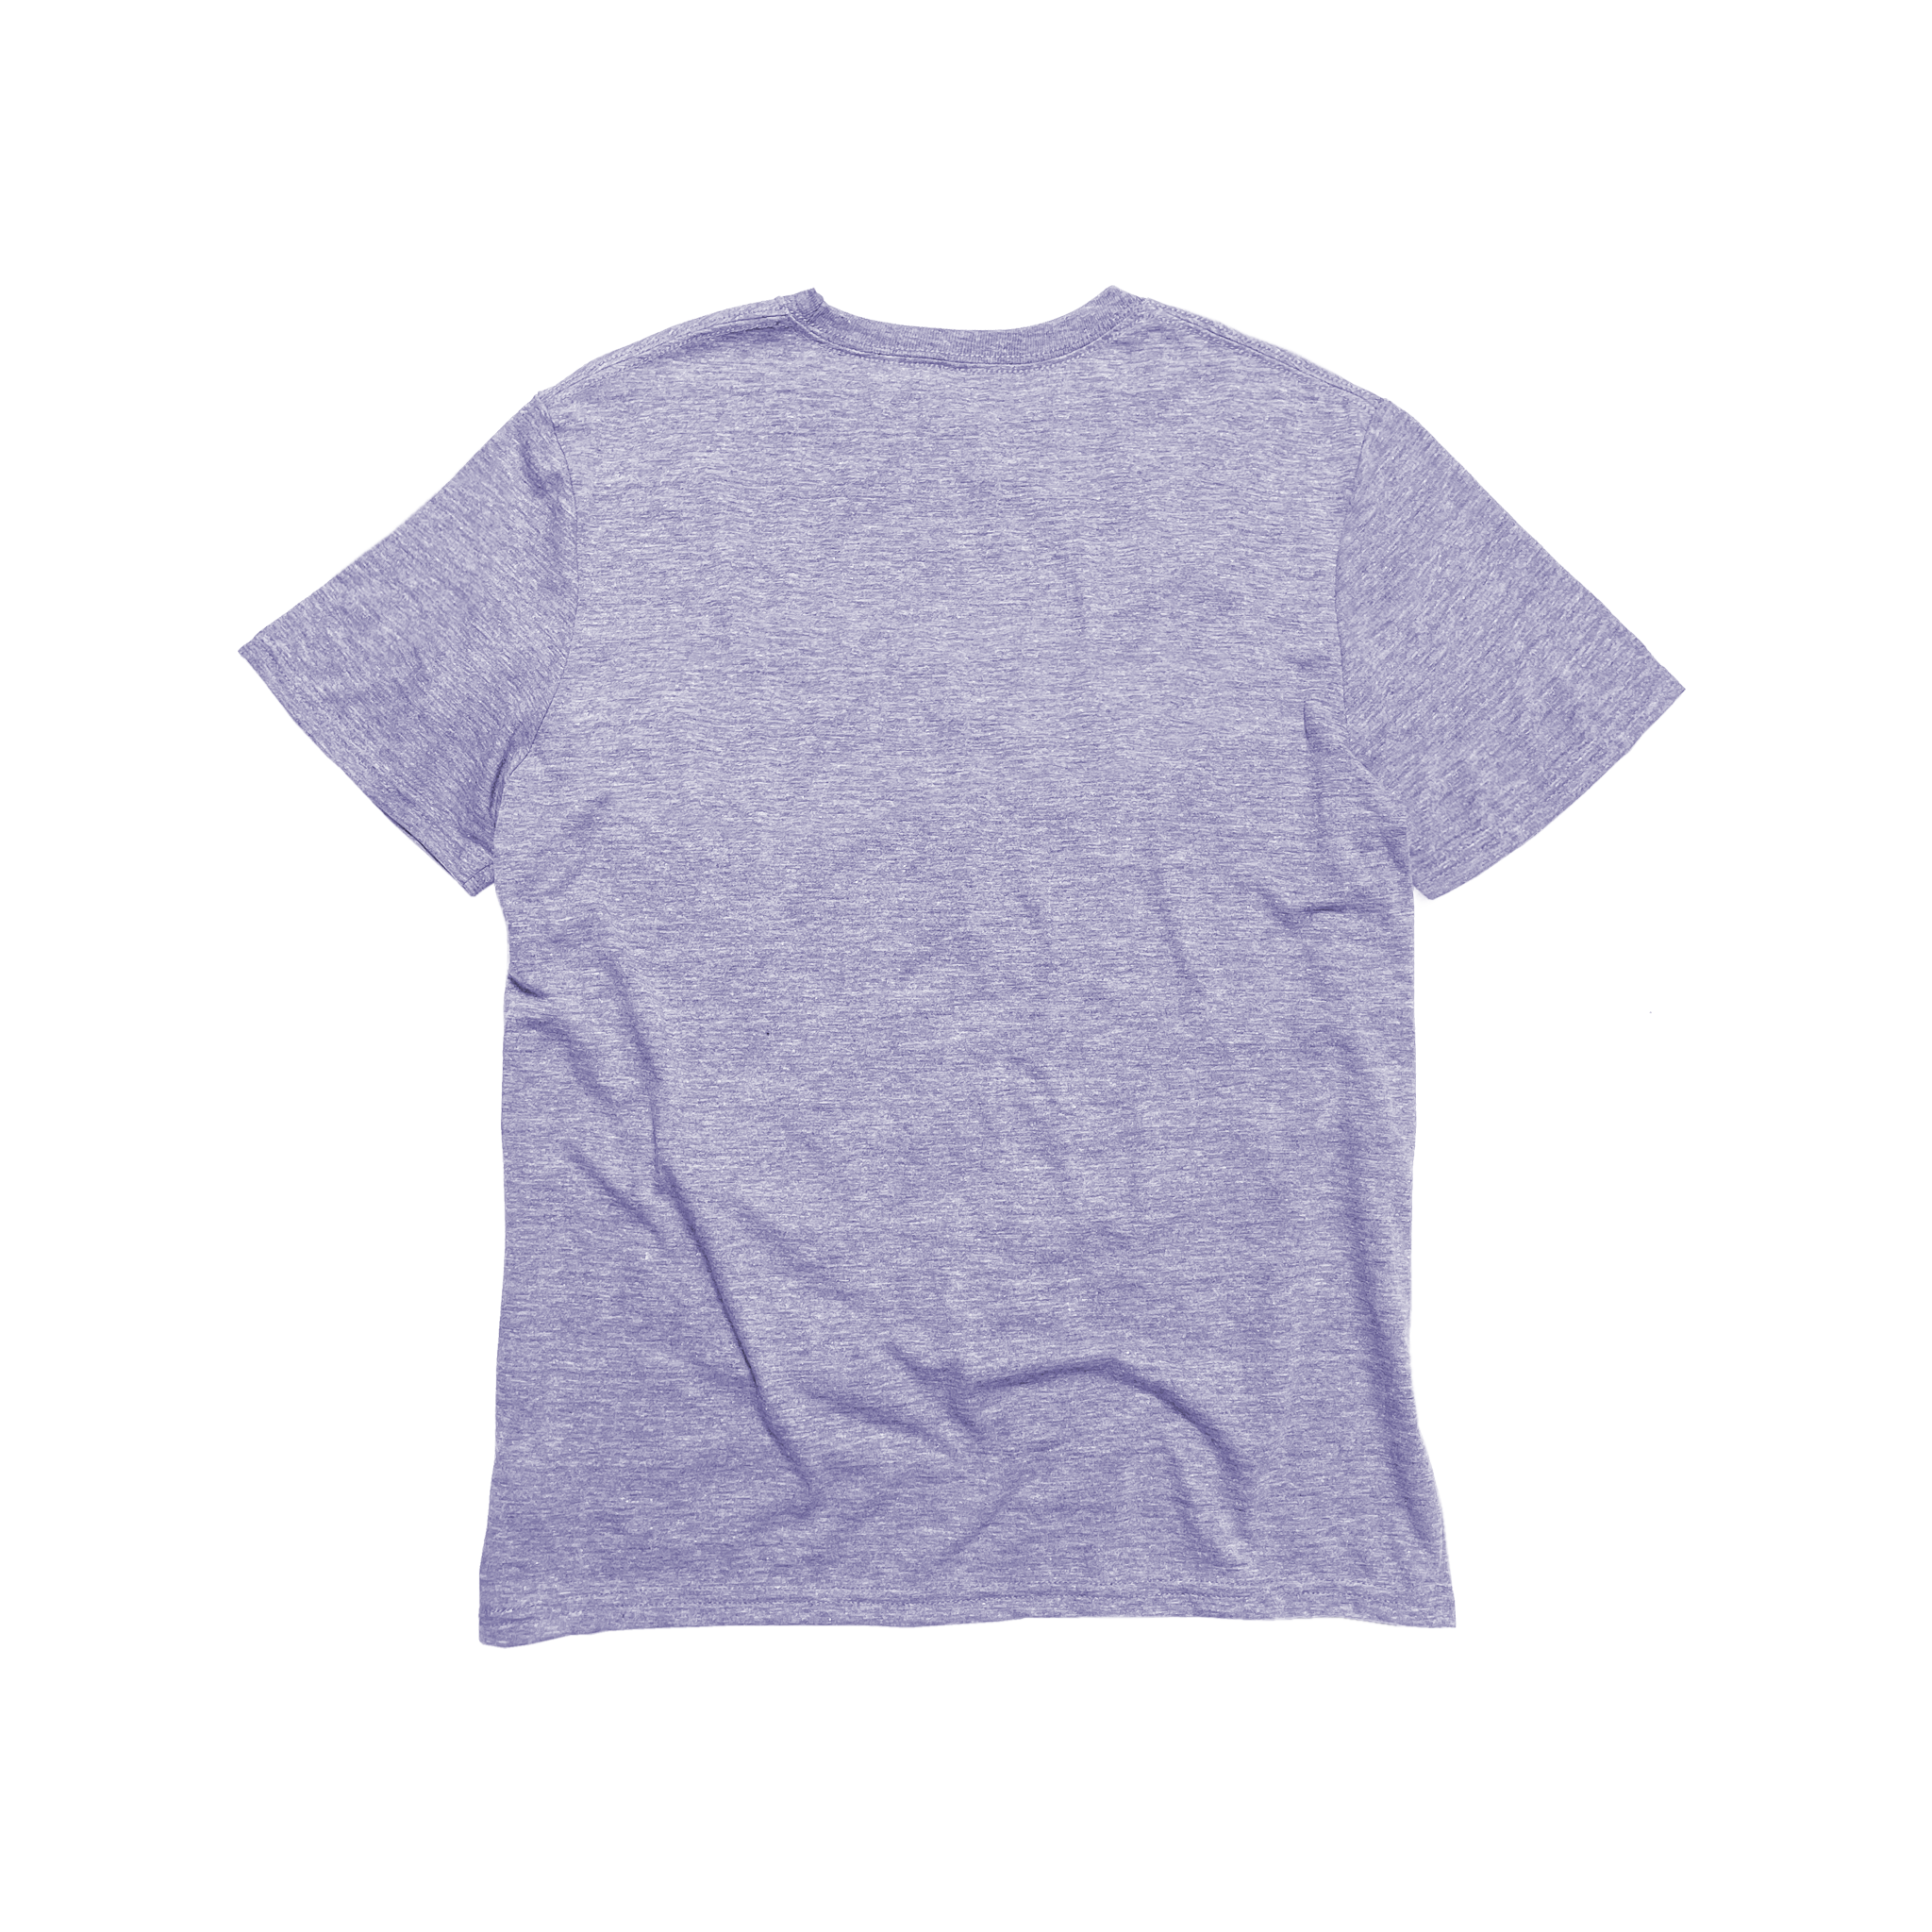 Back Flat Lay of GOEX Unisex and Men's Eco Triblend Tee in Lavender